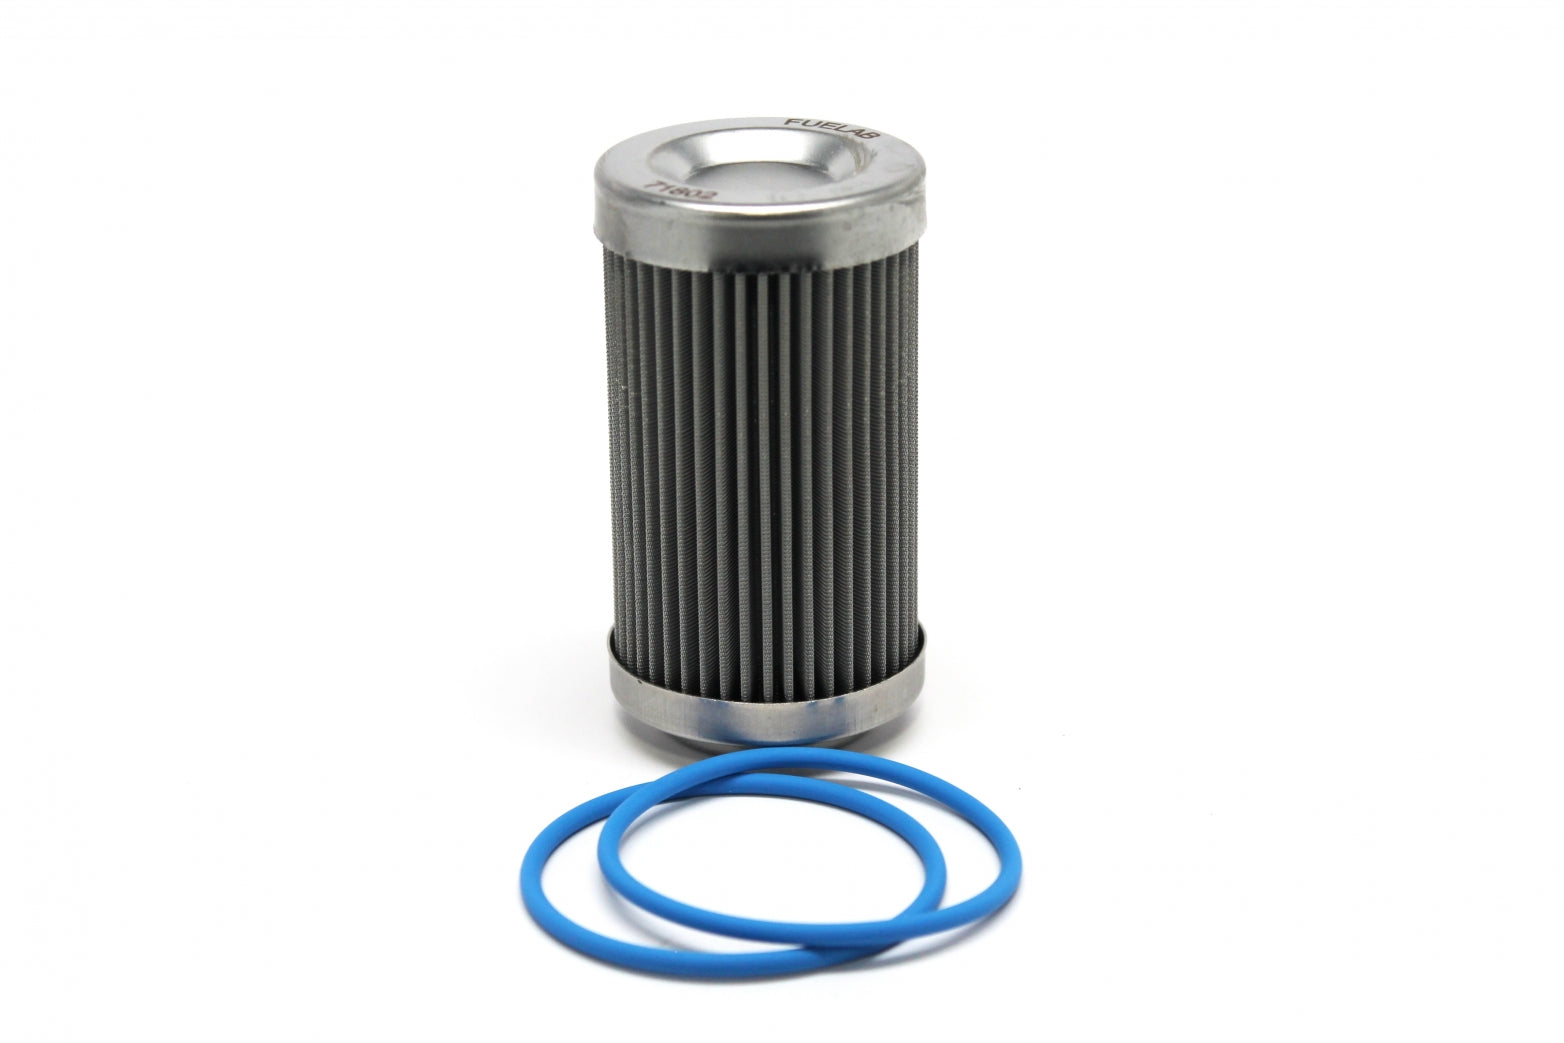 FUELAB 71802 Fuel Filter Replacement Element 3 inch 40 micron Stainless Steel Photo-0 